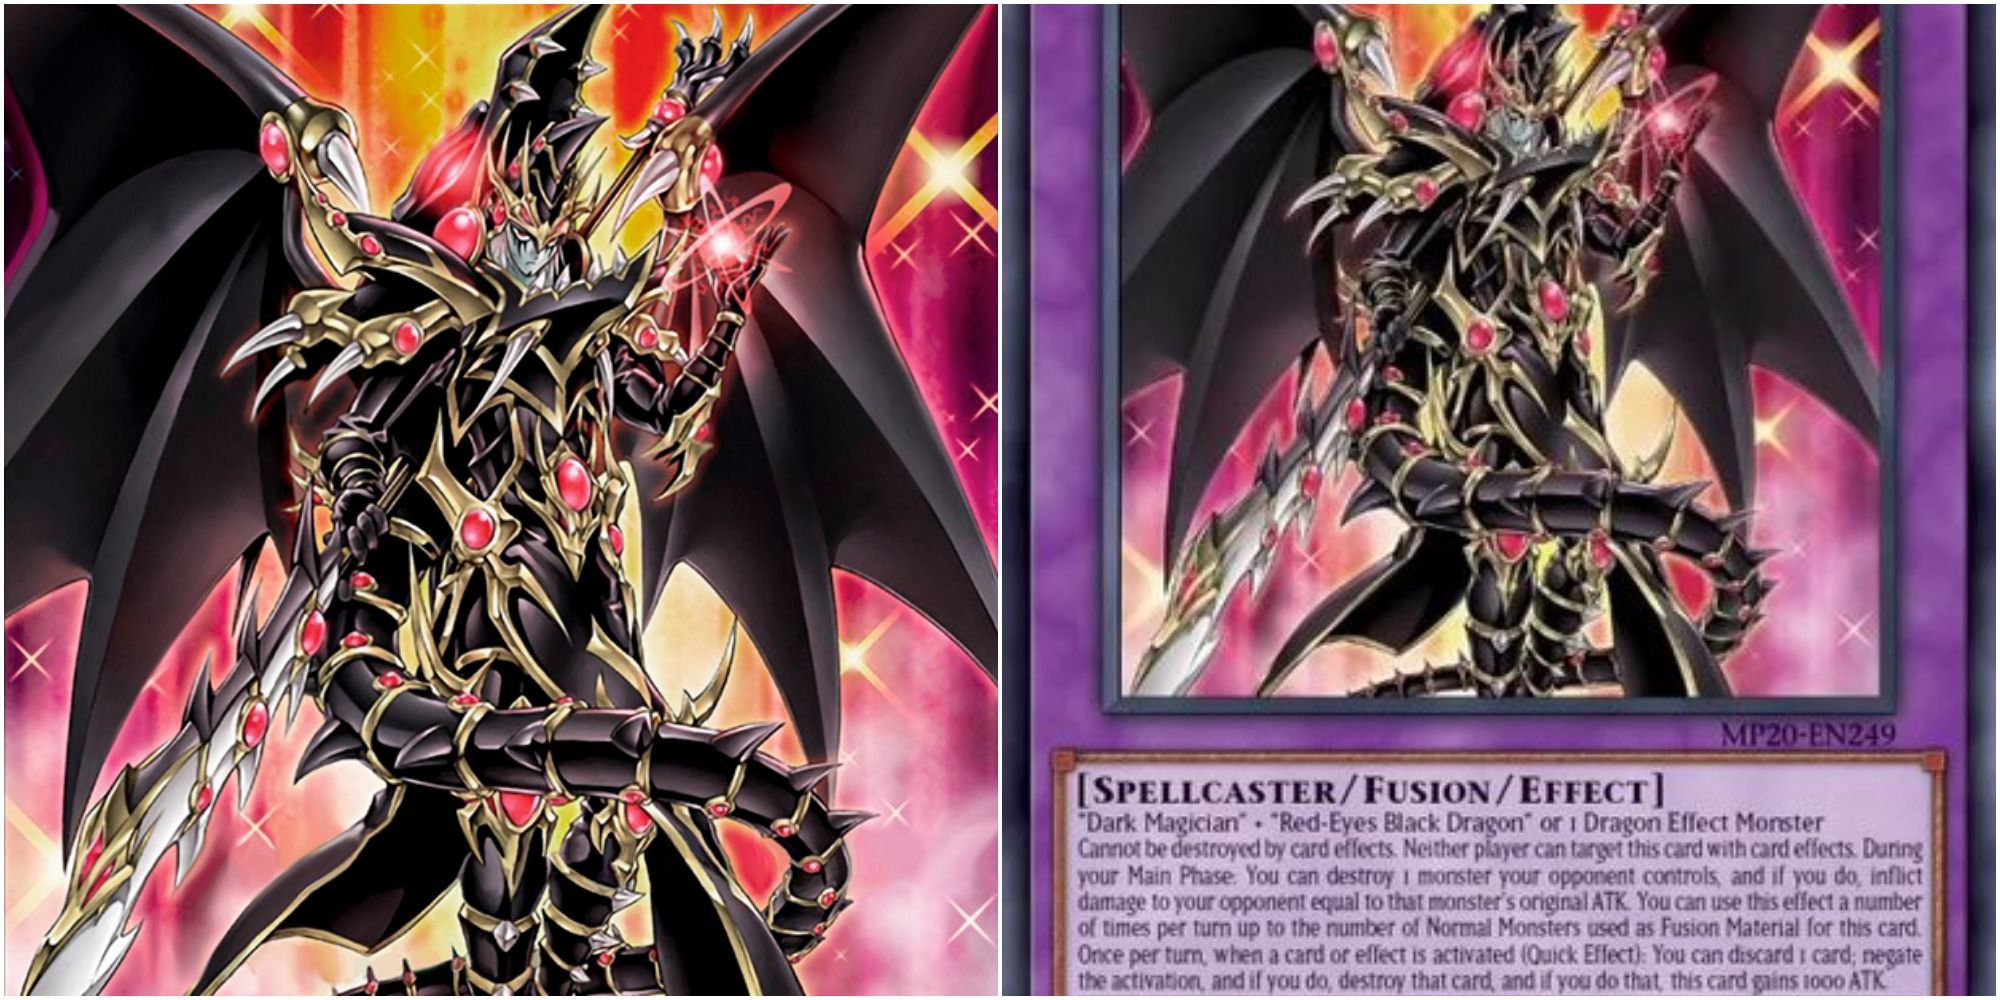 red eyes dark dargoon card art and text